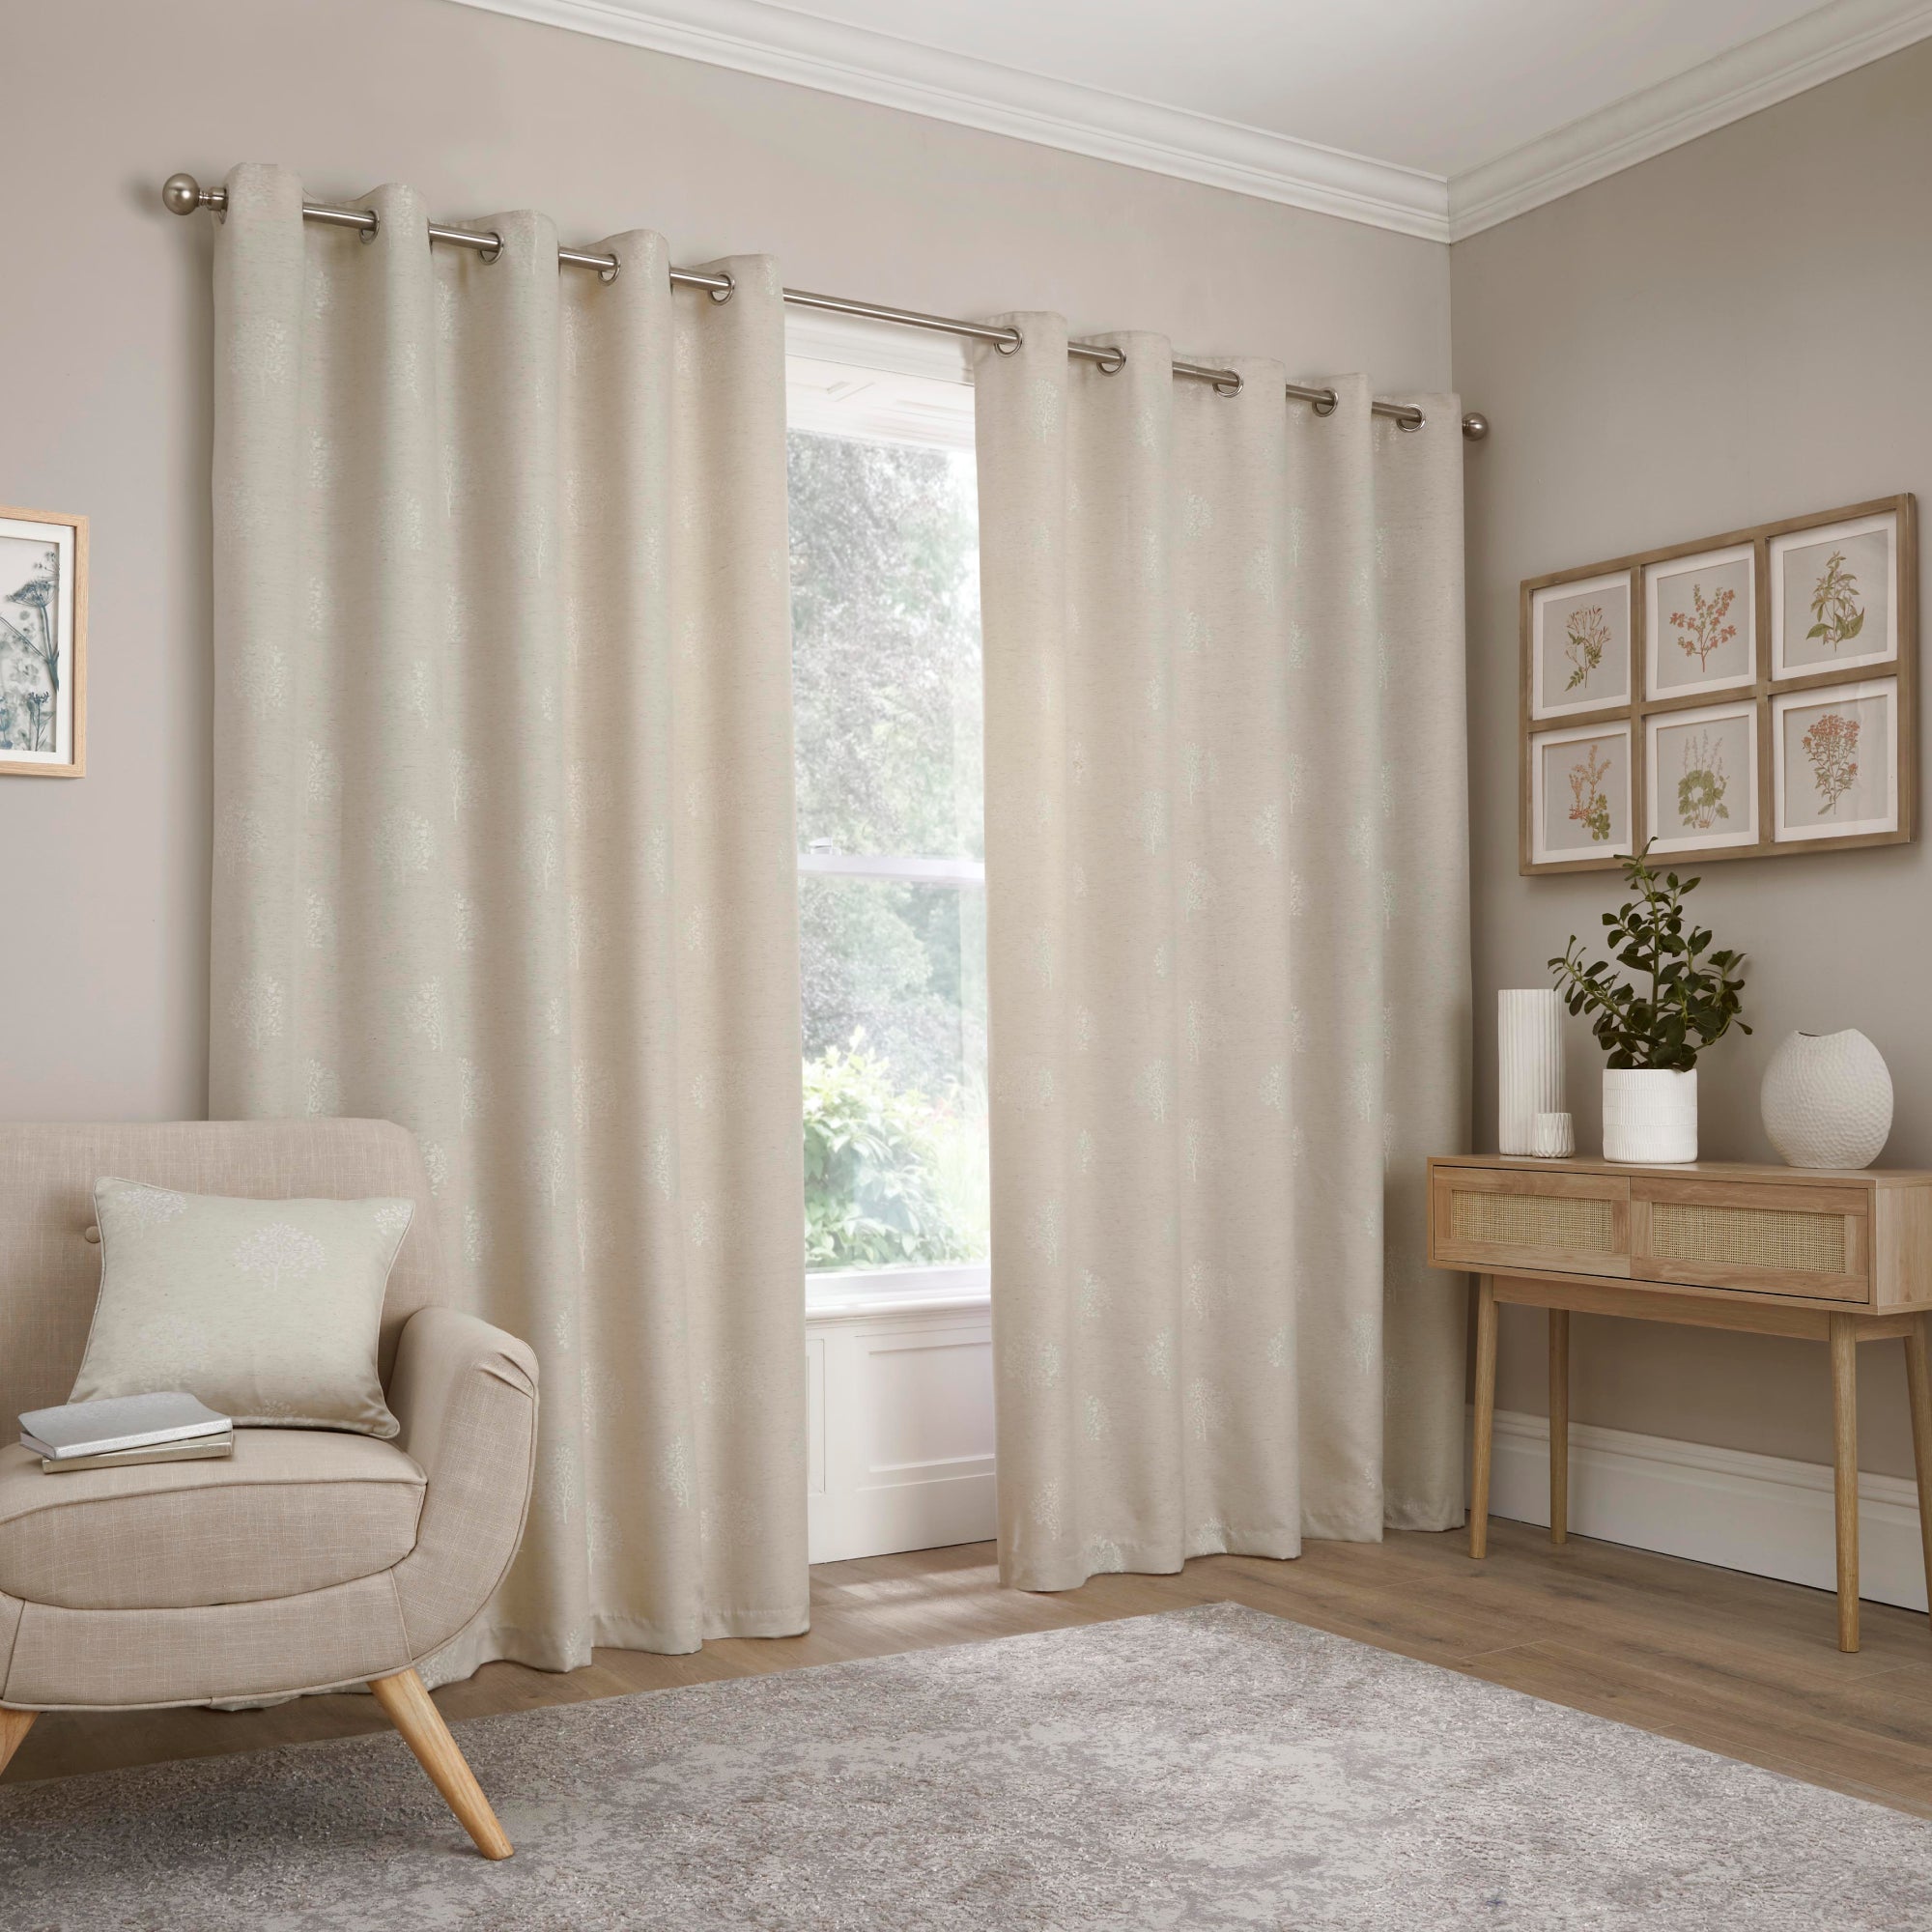 Pair of Eyelet Curtains Harvest by Appletree Loft in Natural